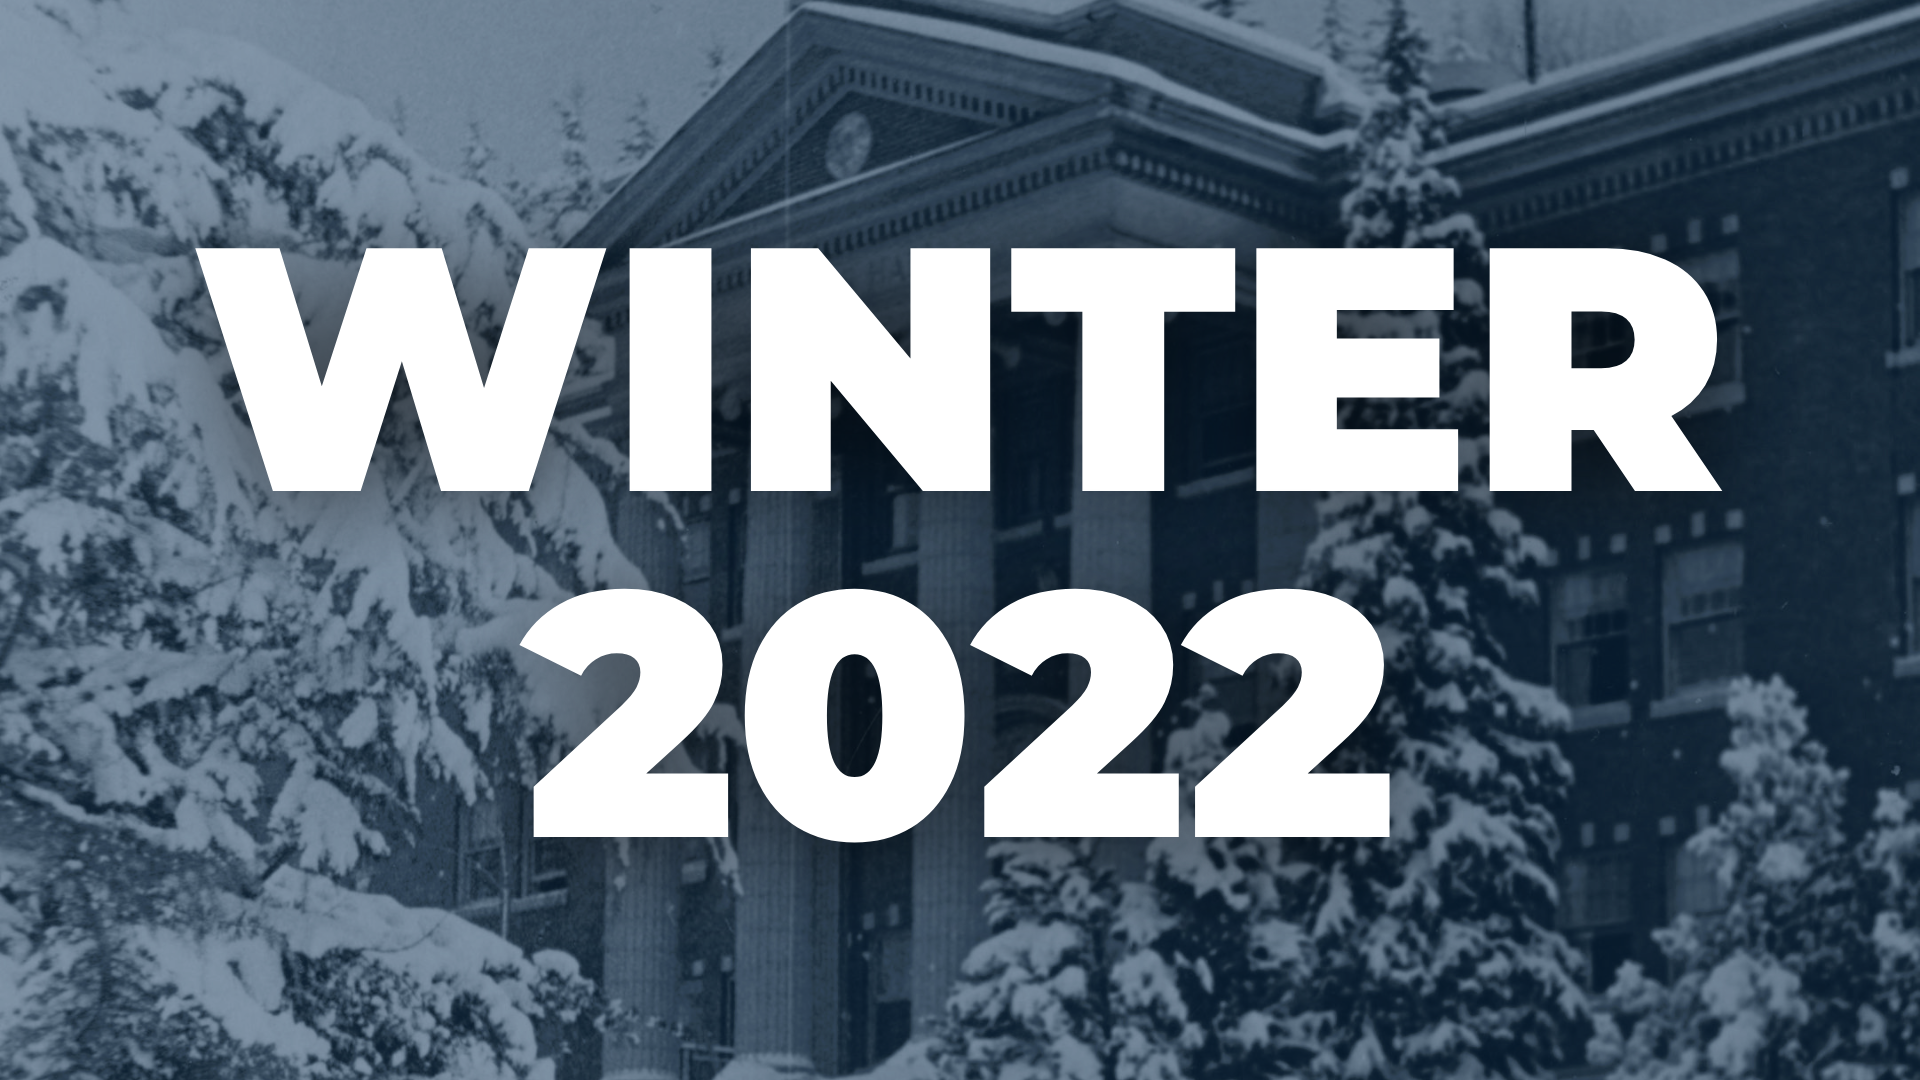 "Winter 2022" is printed over an image of Edens Hall in the snow